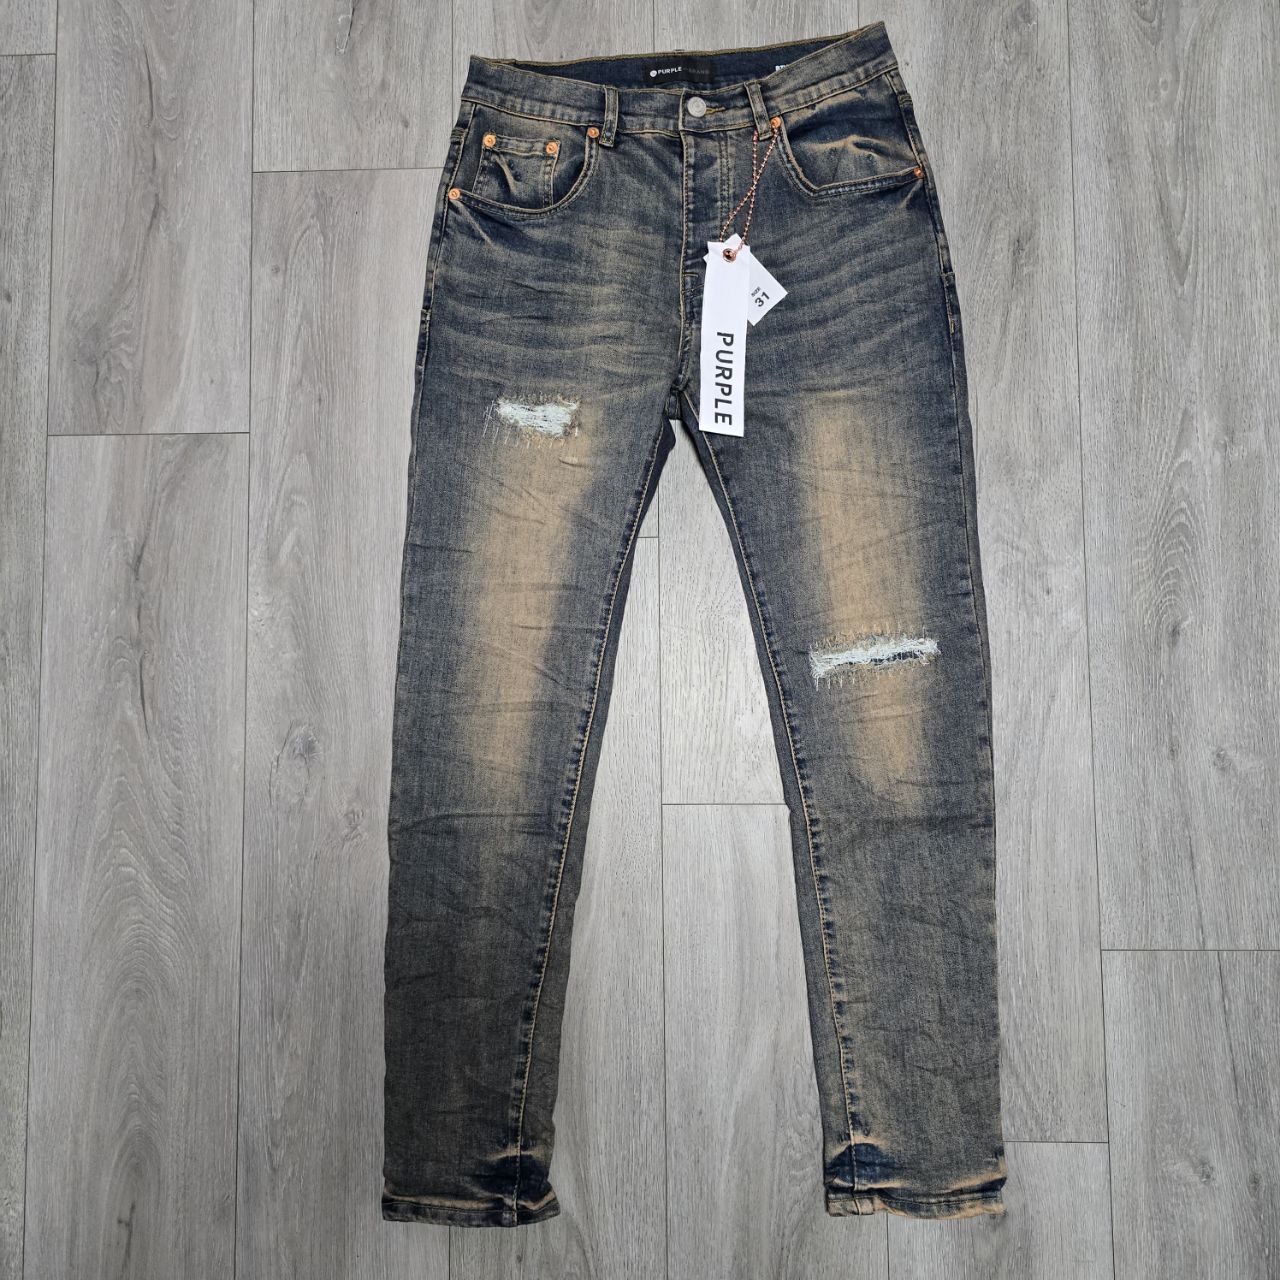 Men Jeans Size: 30,32 [Price: $95 For 1, $180 For 2]